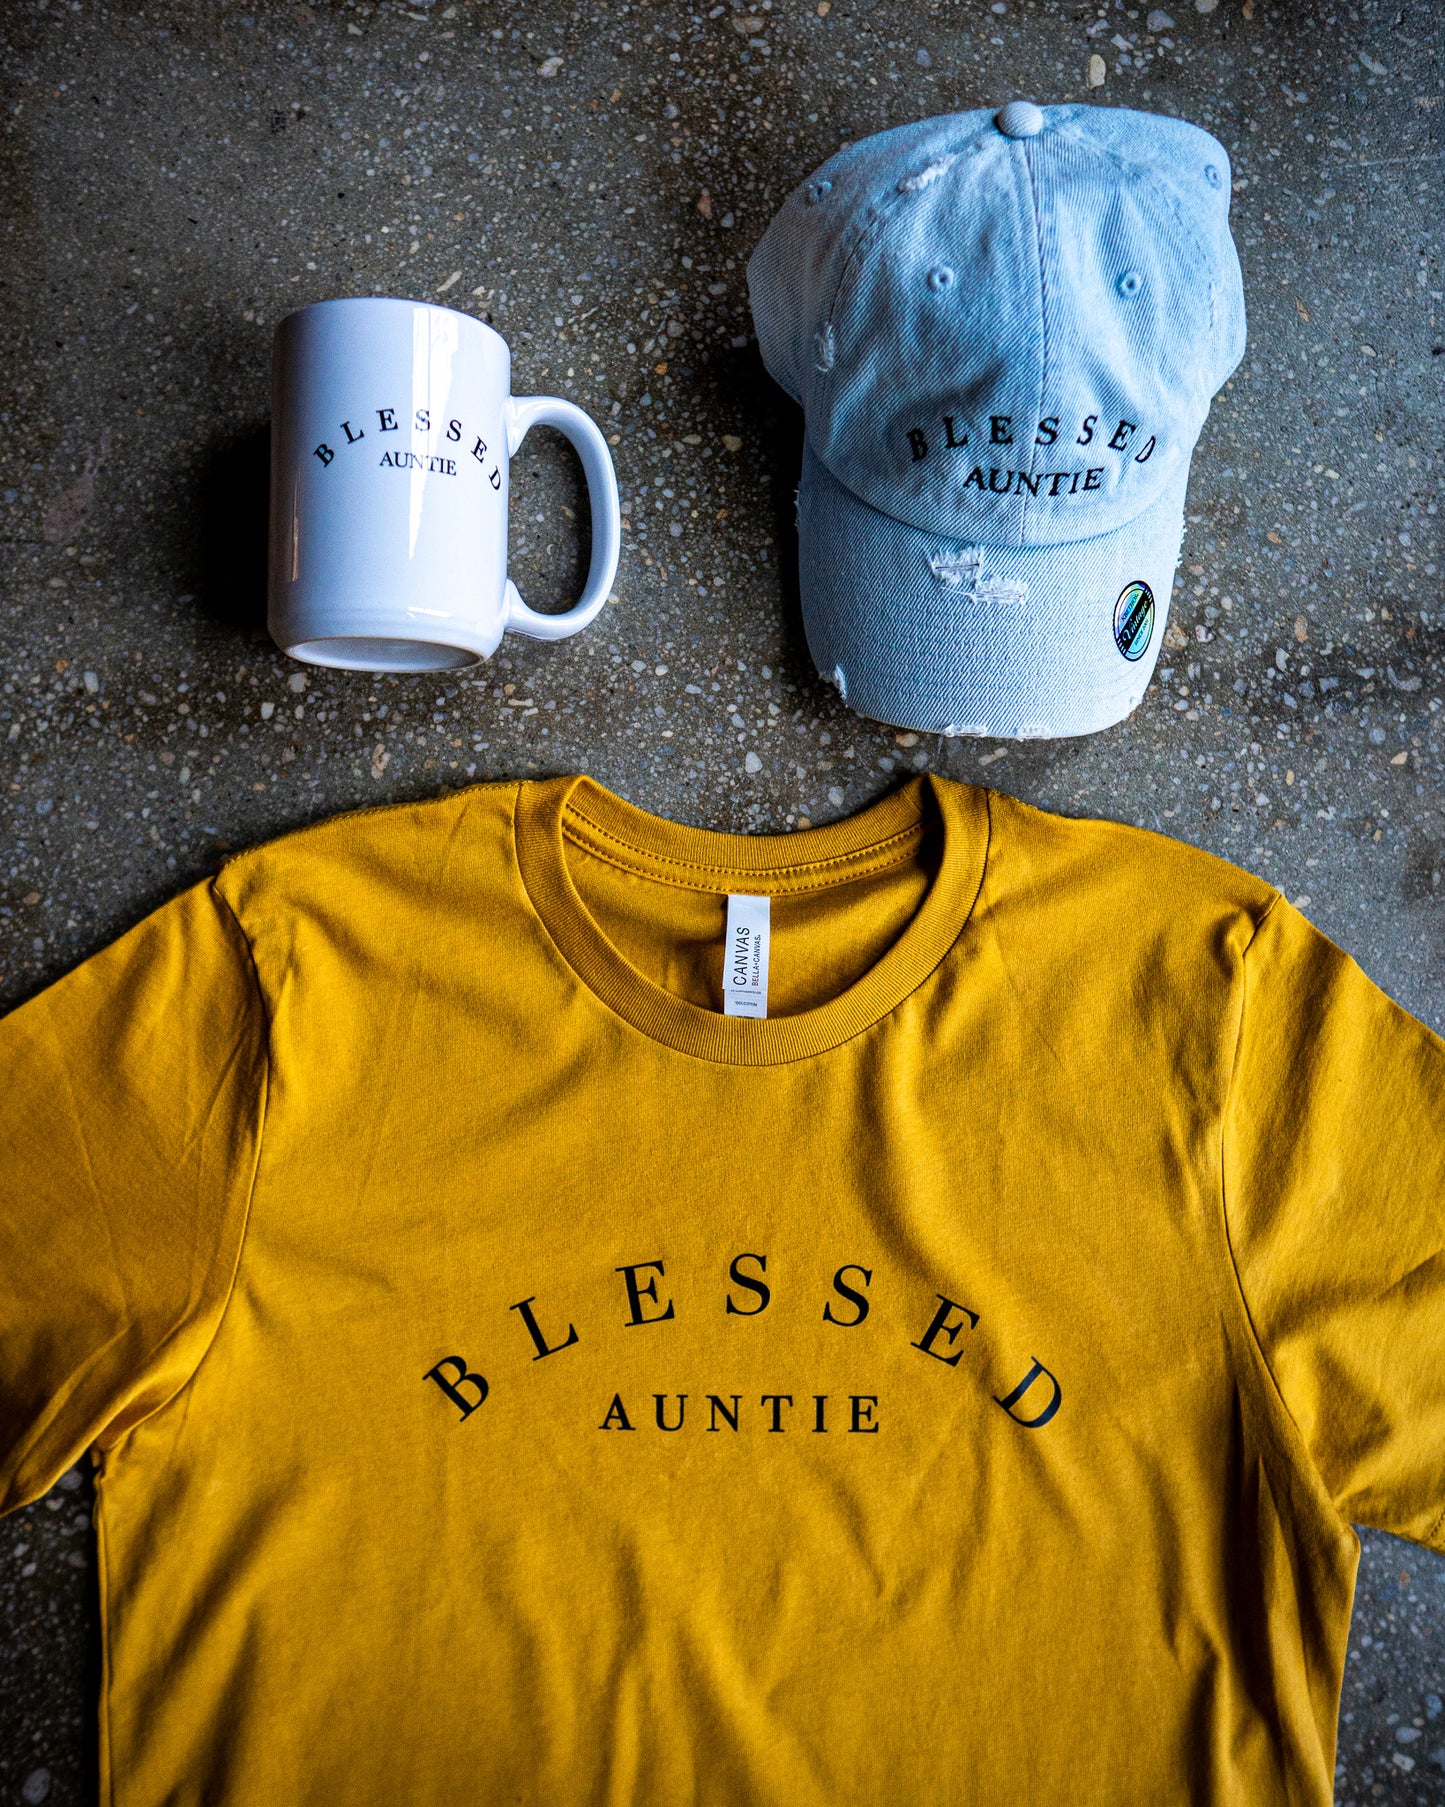 Blessed Auntie Adult Box T-Shirt & Distressed Hat & Mug